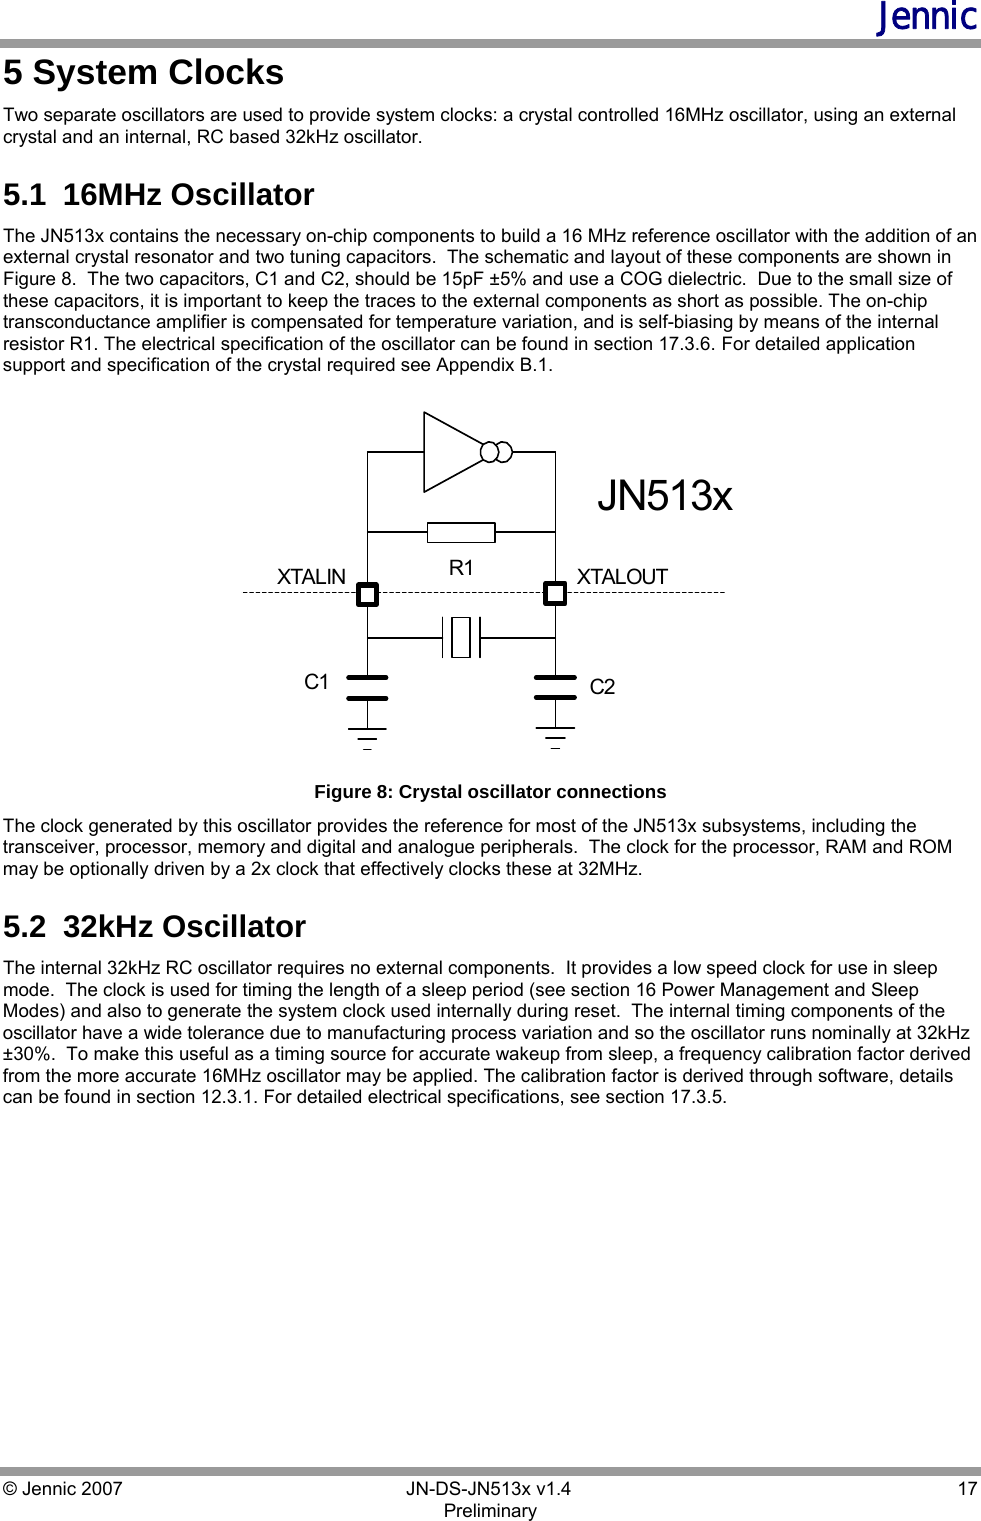 Jennic © Jennic 2007        JN-DS-JN513x v1.4  17 Preliminary 5 System Clocks Two separate oscillators are used to provide system clocks: a crystal controlled 16MHz oscillator, using an external crystal and an internal, RC based 32kHz oscillator. 5.1  16MHz Oscillator The JN513x contains the necessary on-chip components to build a 16 MHz reference oscillator with the addition of an external crystal resonator and two tuning capacitors.  The schematic and layout of these components are shown in Figure 8.  The two capacitors, C1 and C2, should be 15pF ±5% and use a COG dielectric.  Due to the small size of these capacitors, it is important to keep the traces to the external components as short as possible. The on-chip transconductance amplifier is compensated for temperature variation, and is self-biasing by means of the internal resistor R1. The electrical specification of the oscillator can be found in section 17.3.6. For detailed application support and specification of the crystal required see Appendix B.1. XTALOUTC2C1R1XTALINJN513x Figure 8: Crystal oscillator connections  The clock generated by this oscillator provides the reference for most of the JN513x subsystems, including the transceiver, processor, memory and digital and analogue peripherals.  The clock for the processor, RAM and ROM may be optionally driven by a 2x clock that effectively clocks these at 32MHz. 5.2  32kHz Oscillator The internal 32kHz RC oscillator requires no external components.  It provides a low speed clock for use in sleep mode.  The clock is used for timing the length of a sleep period (see section 16 Power Management and Sleep Modes) and also to generate the system clock used internally during reset.  The internal timing components of the oscillator have a wide tolerance due to manufacturing process variation and so the oscillator runs nominally at 32kHz ±30%.  To make this useful as a timing source for accurate wakeup from sleep, a frequency calibration factor derived from the more accurate 16MHz oscillator may be applied. The calibration factor is derived through software, details can be found in section 12.3.1. For detailed electrical specifications, see section 17.3.5.  